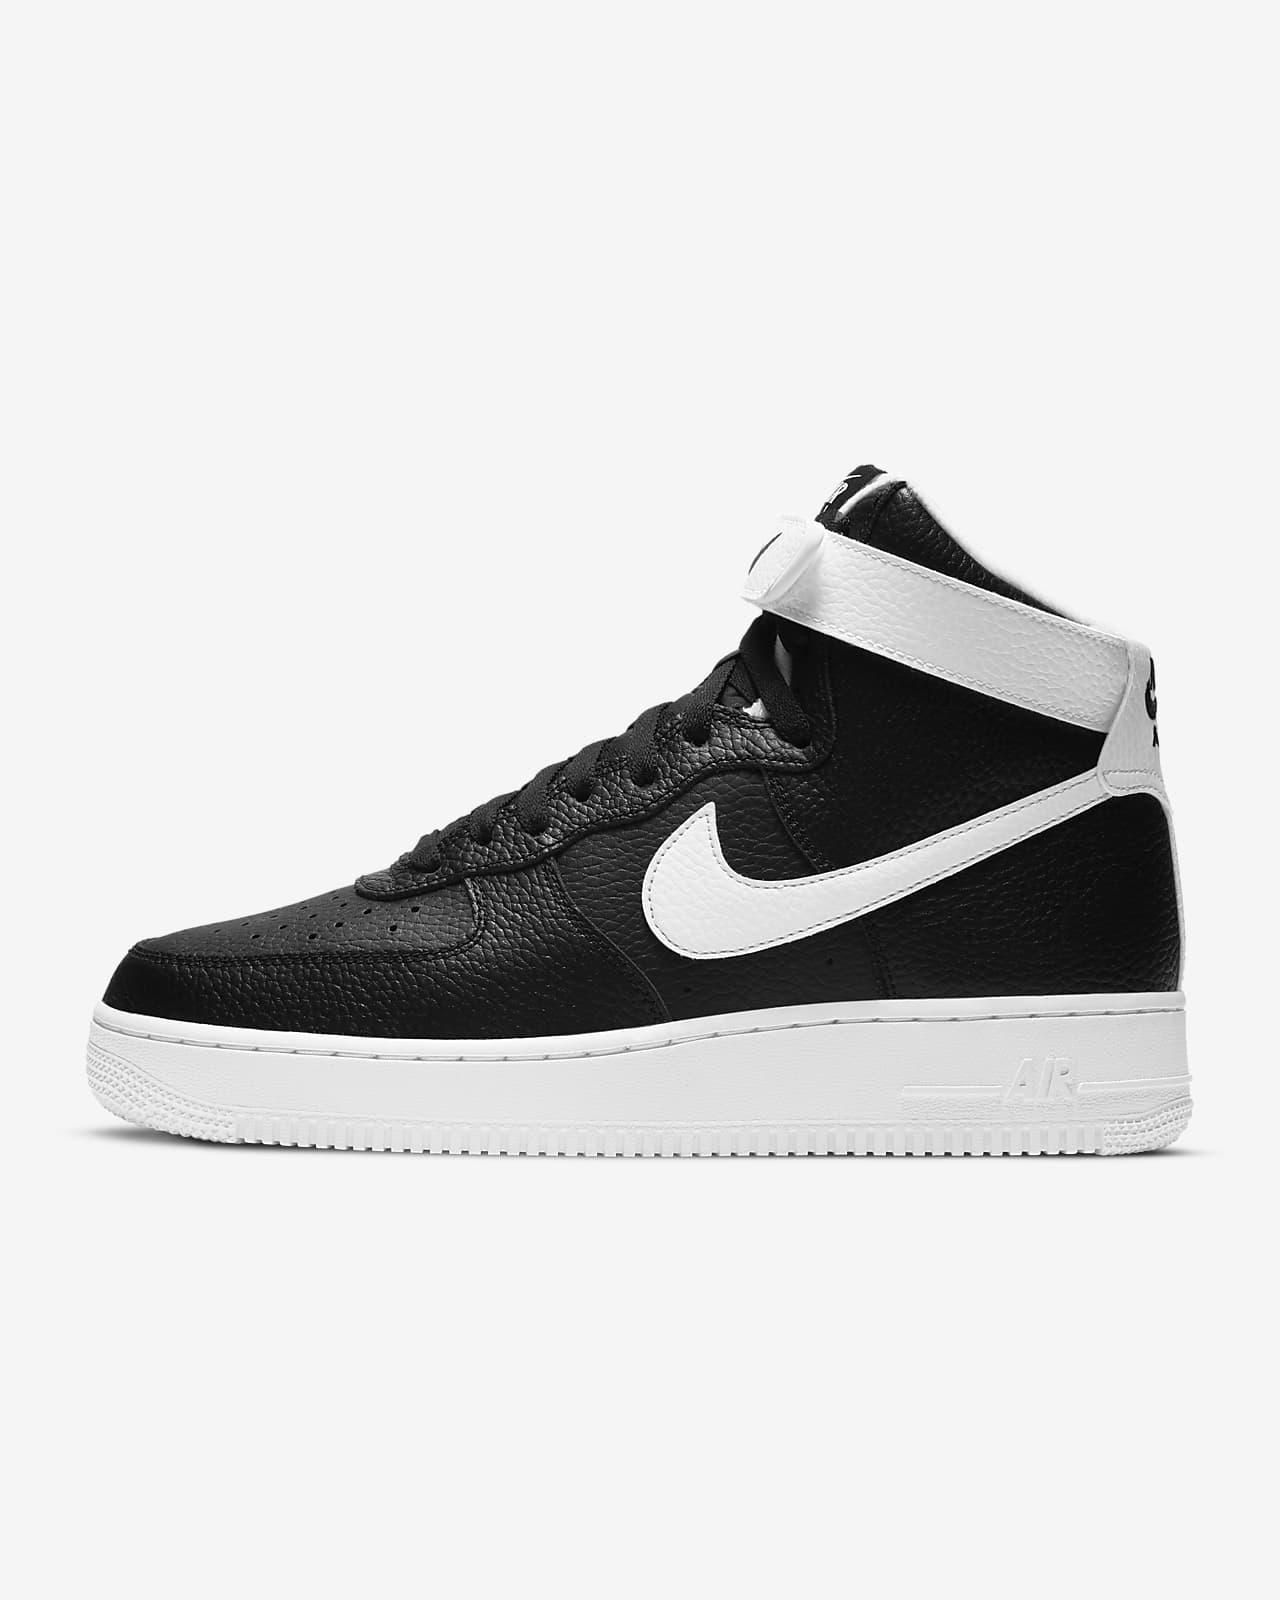 Omitted post office Intense Nike Air Force 1 '07 High Men's Shoes. Nike.com